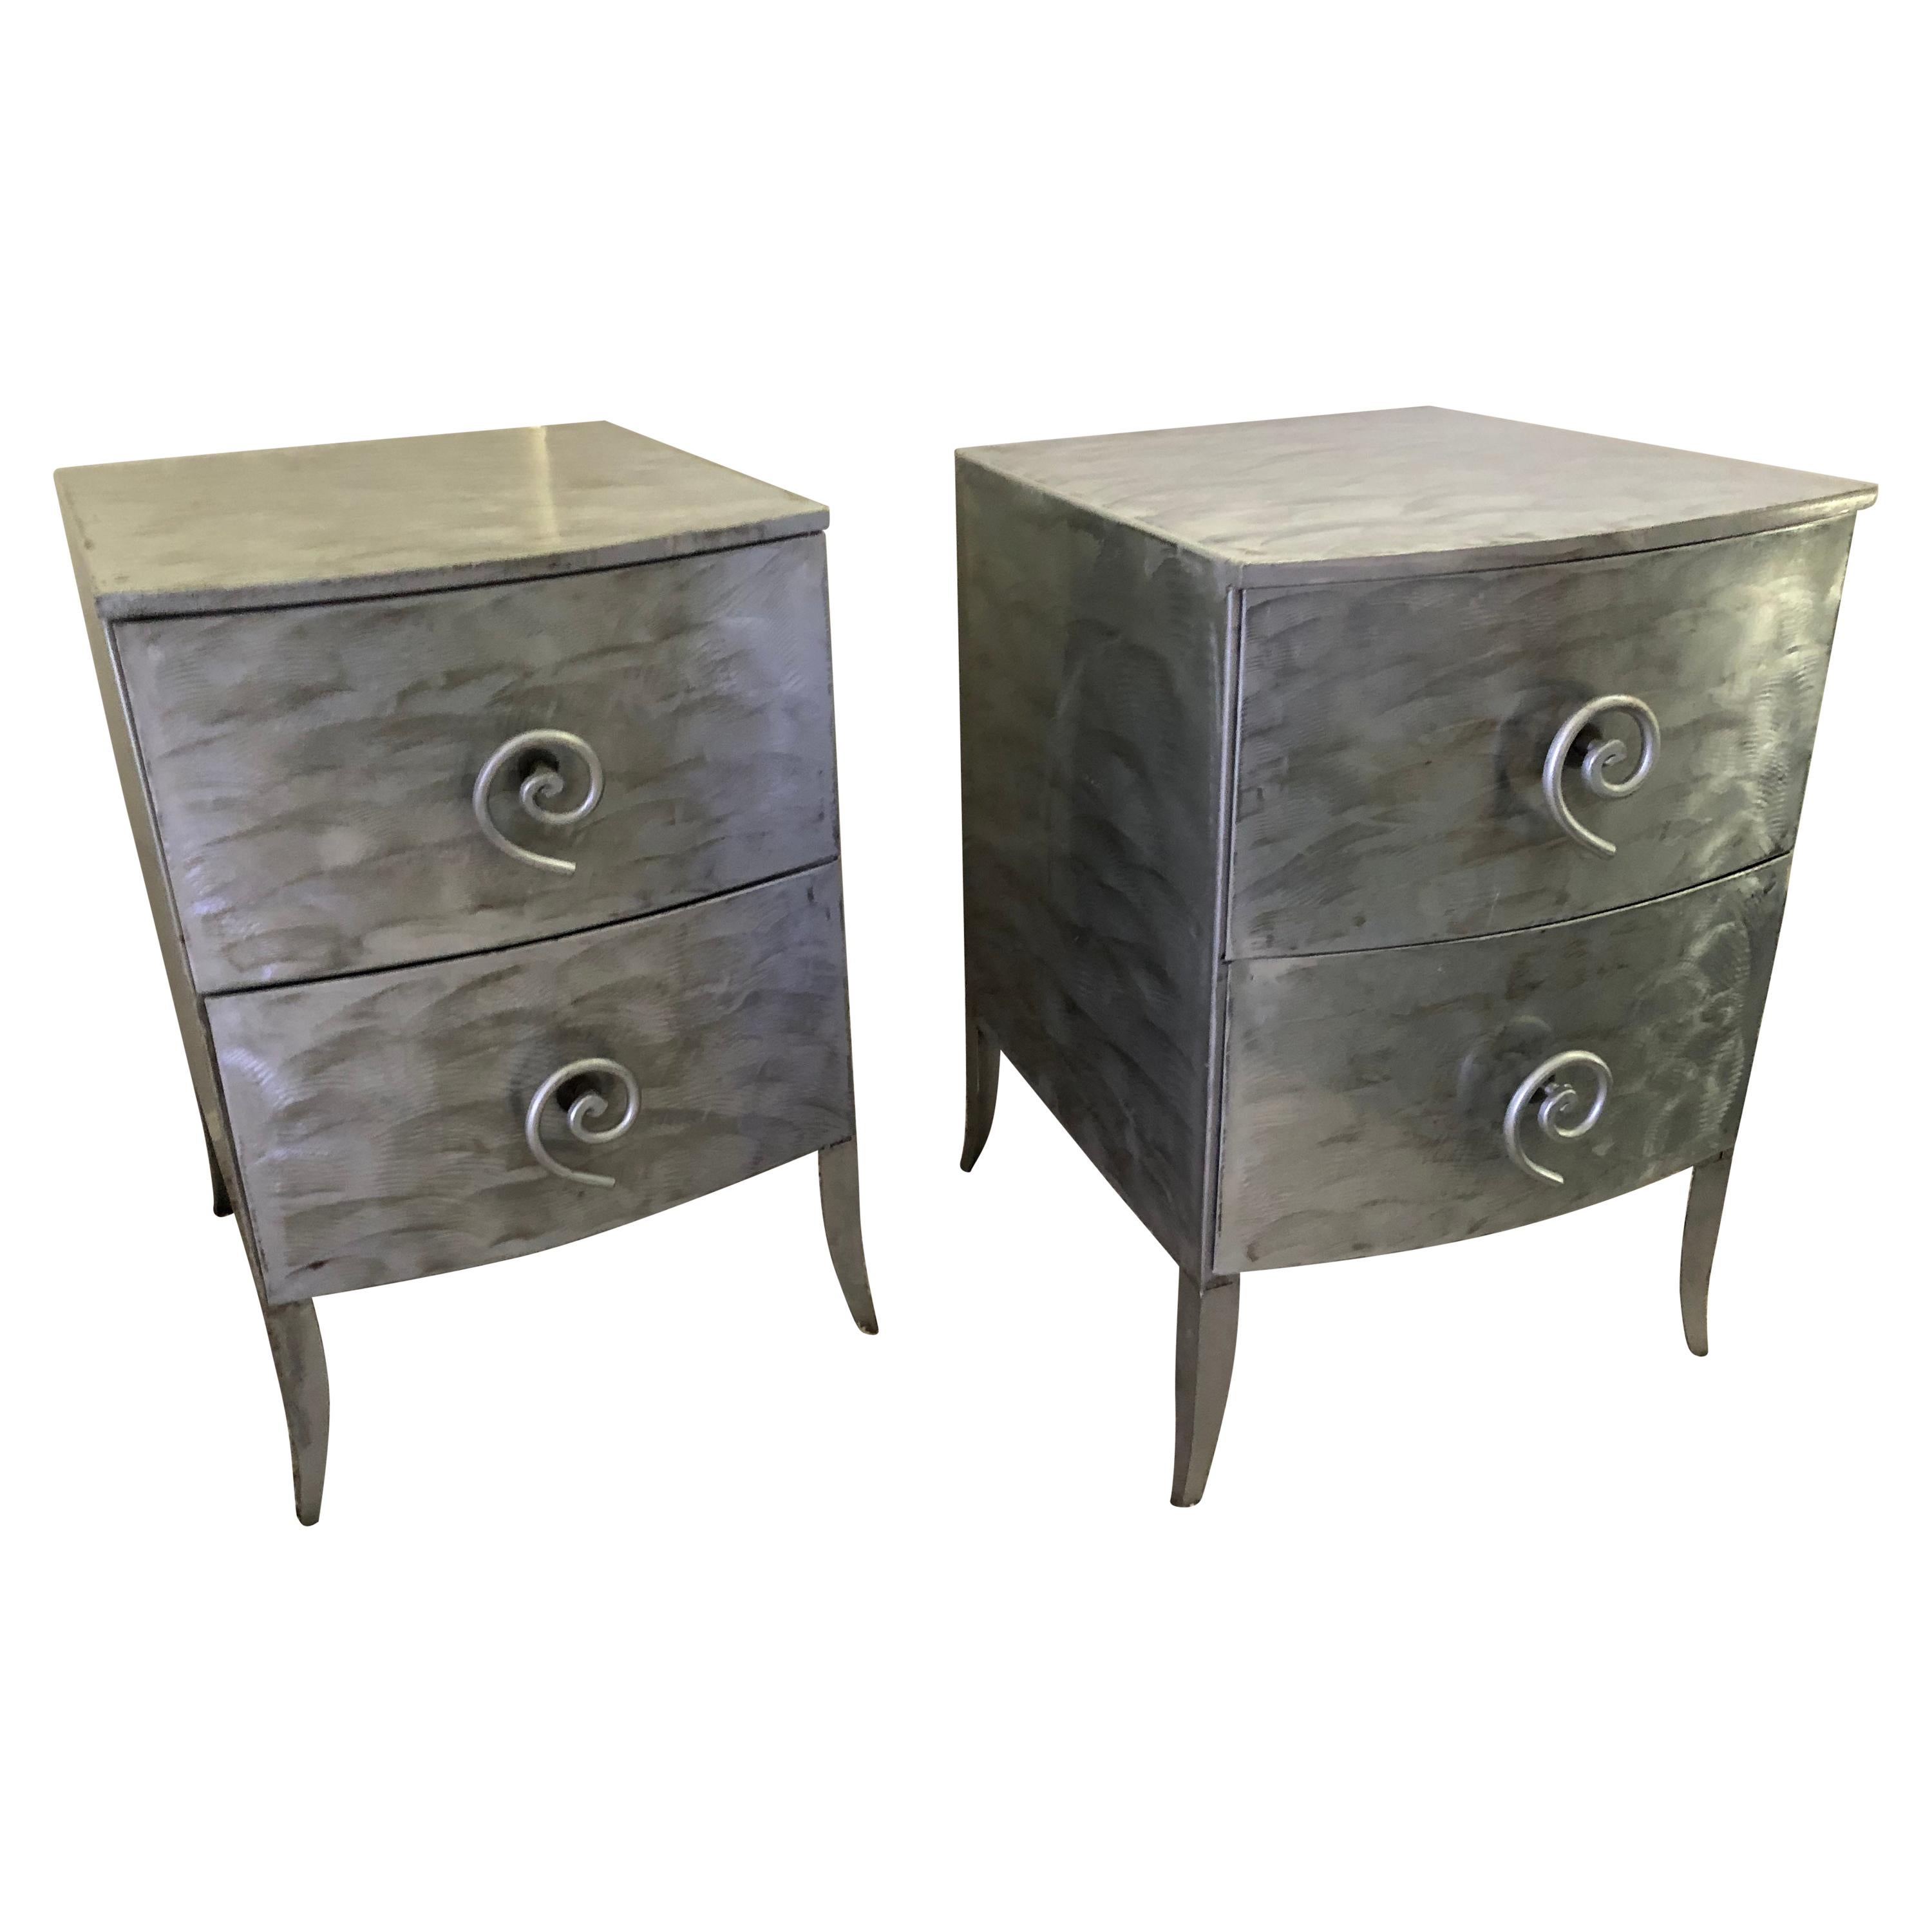 Postmodern Memphis Style Brushed Aluminum Nightstands / End Tables